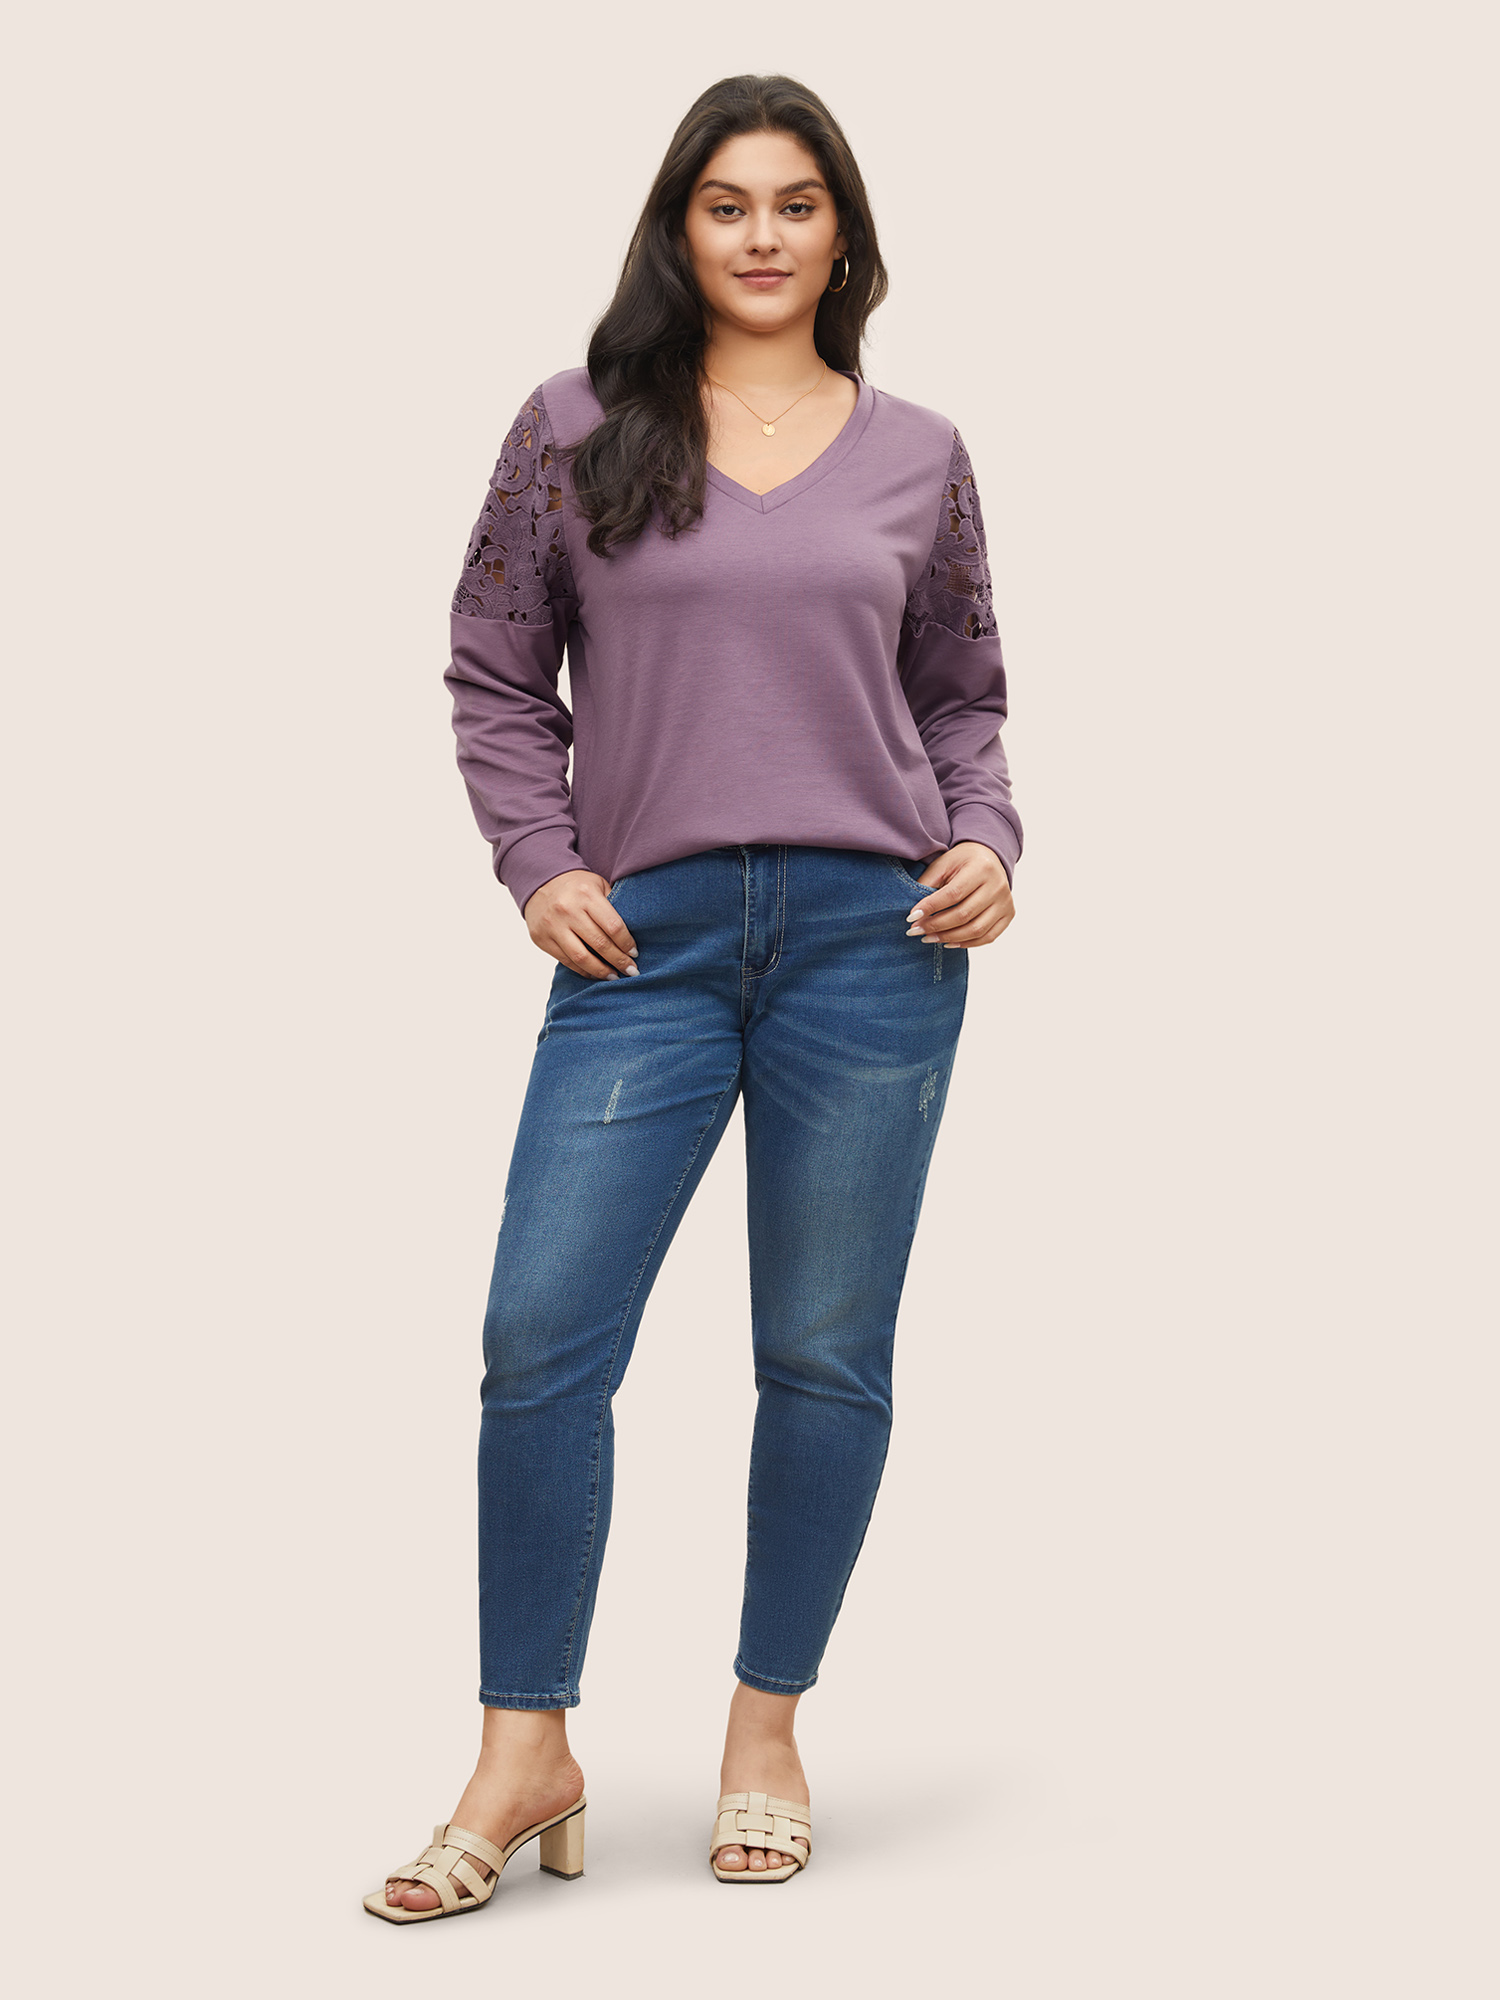 

Plus Size Lace Patchwork Embroidered V Neck Sweatshirt Women Mauve Casual Cut-Out V-neck Everyday Sweatshirts BloomChic